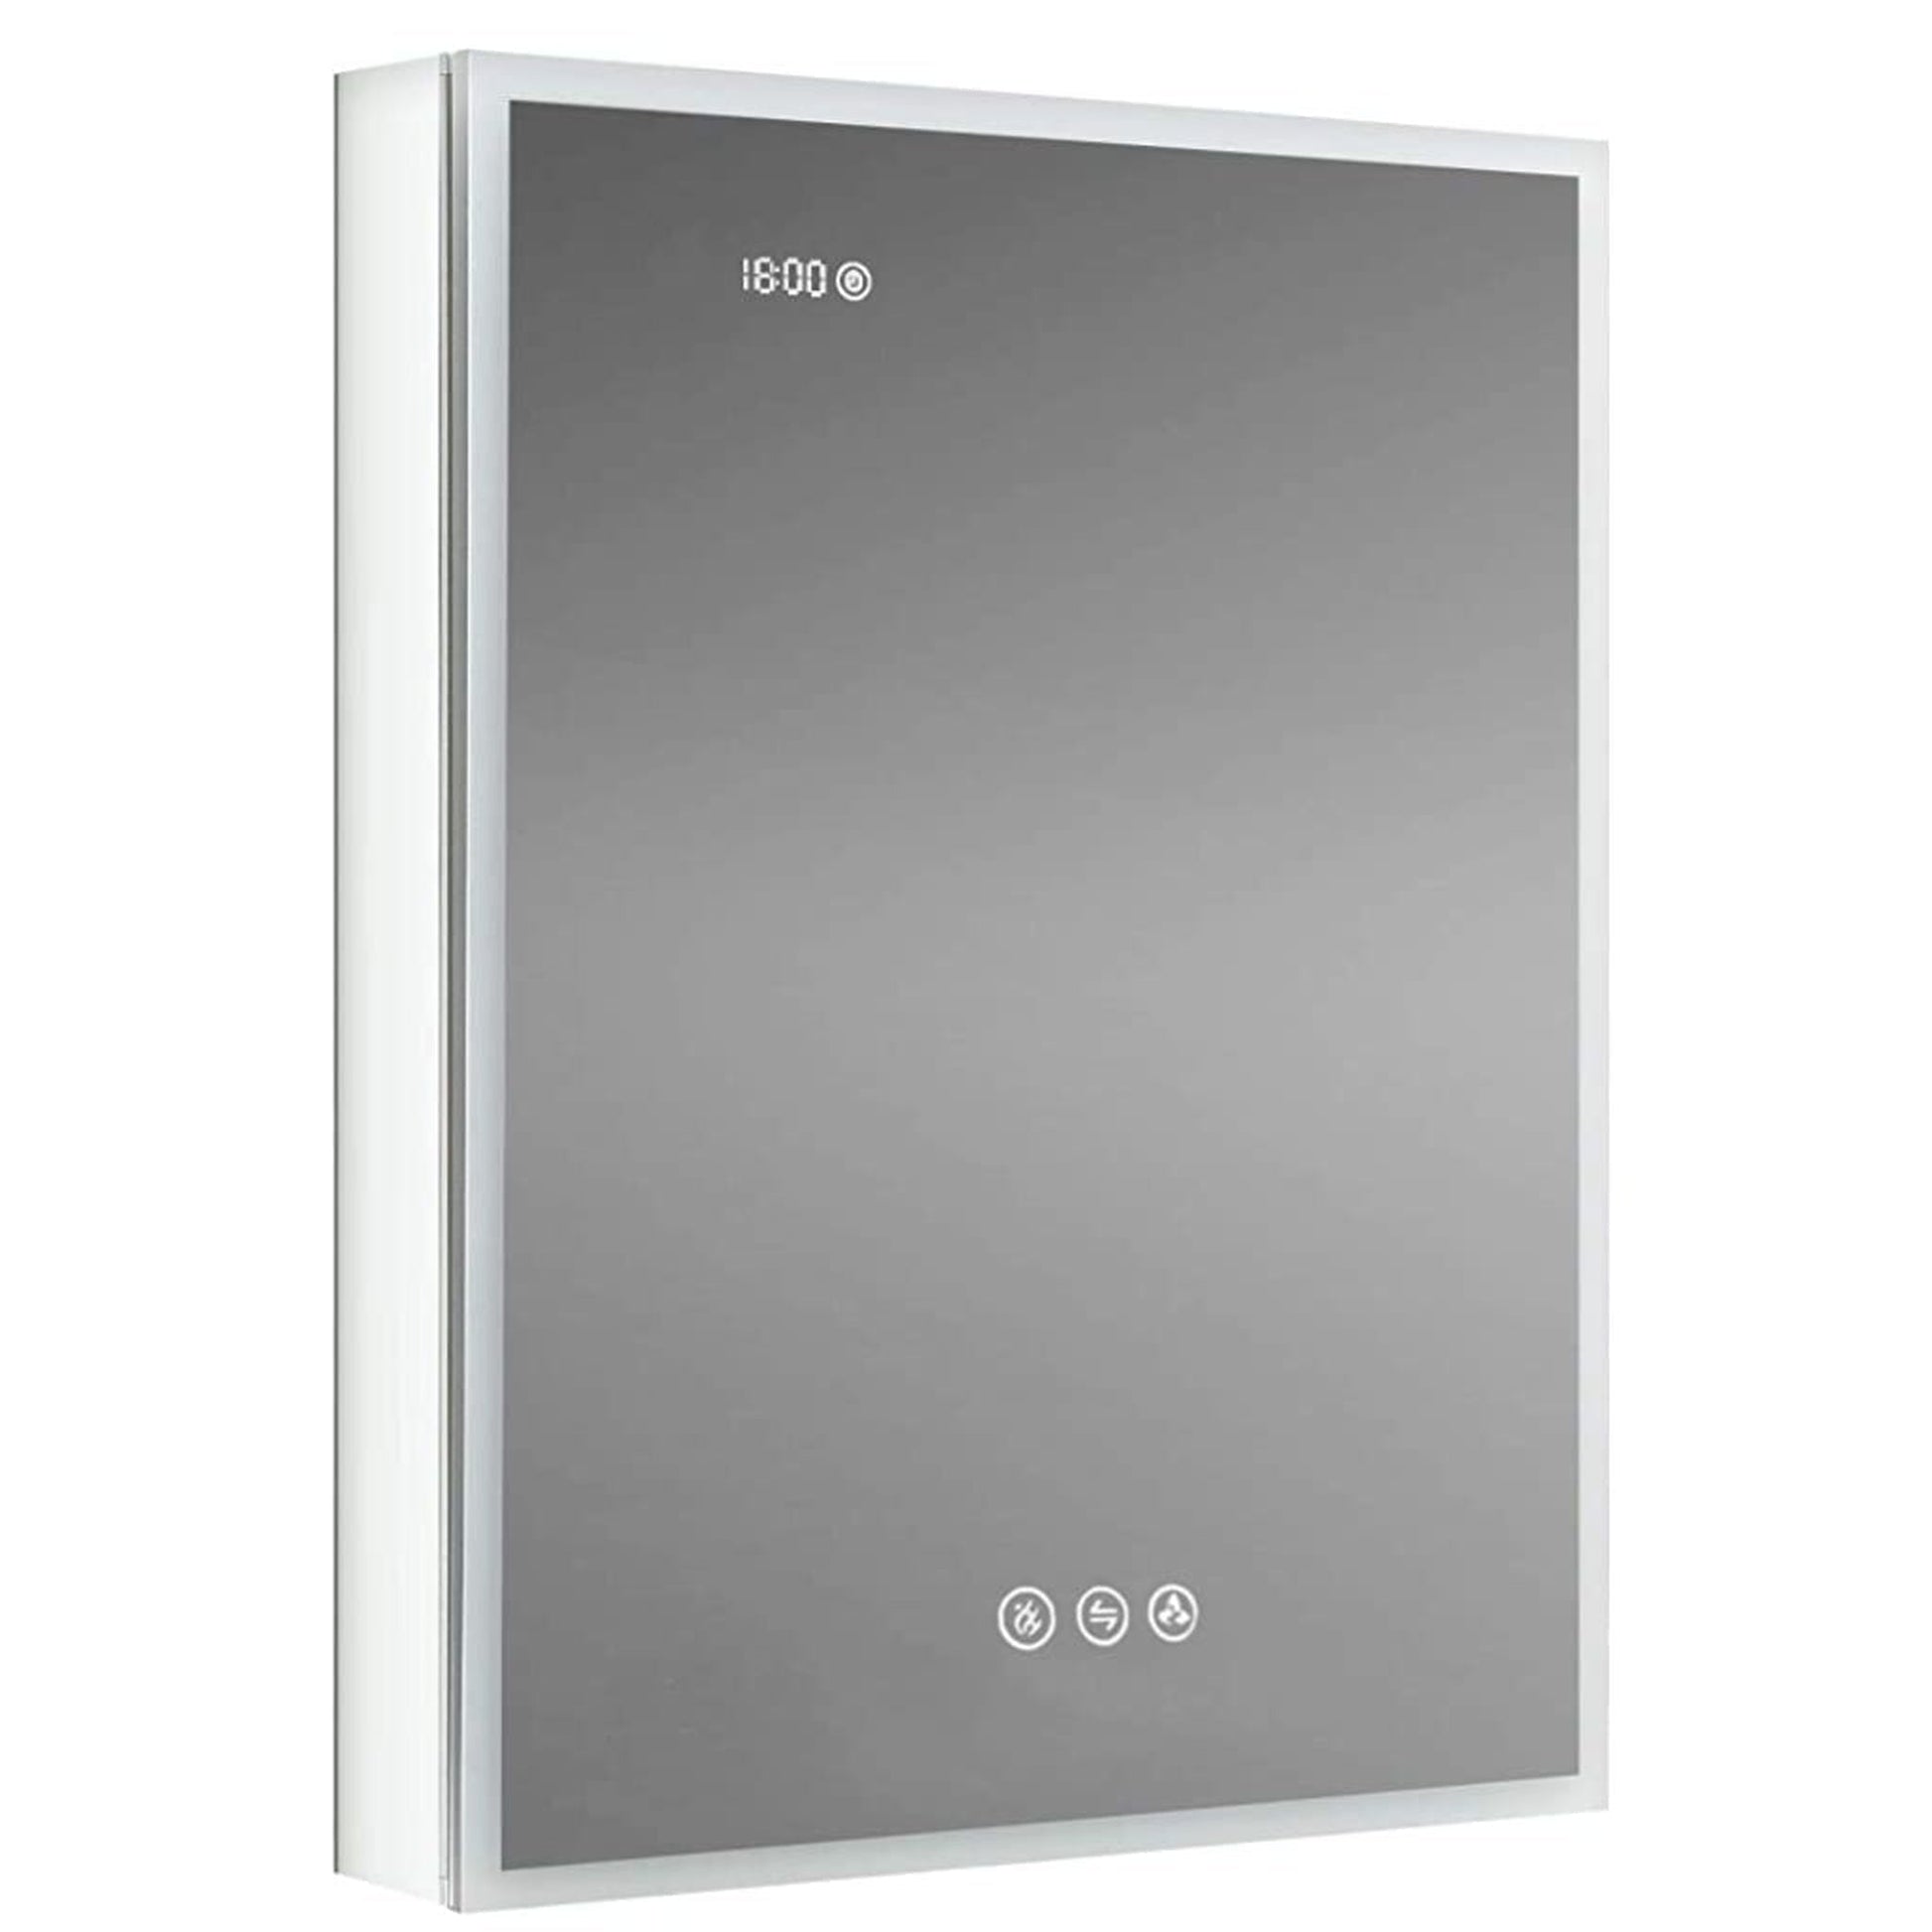 https://usbathstore.com/cdn/shop/products/Blossom-Sirius-24-x-32-Recessed-Or-Surface-Mount-Left-Hinged-Door-Led-Mirror-Medicine-Cabinet-With-3-Adjustable-Glass-Shelves-Built-In-Defogger-Dimmer-Usb-Electrical-Outlet.jpg?v=1675208142&width=1946